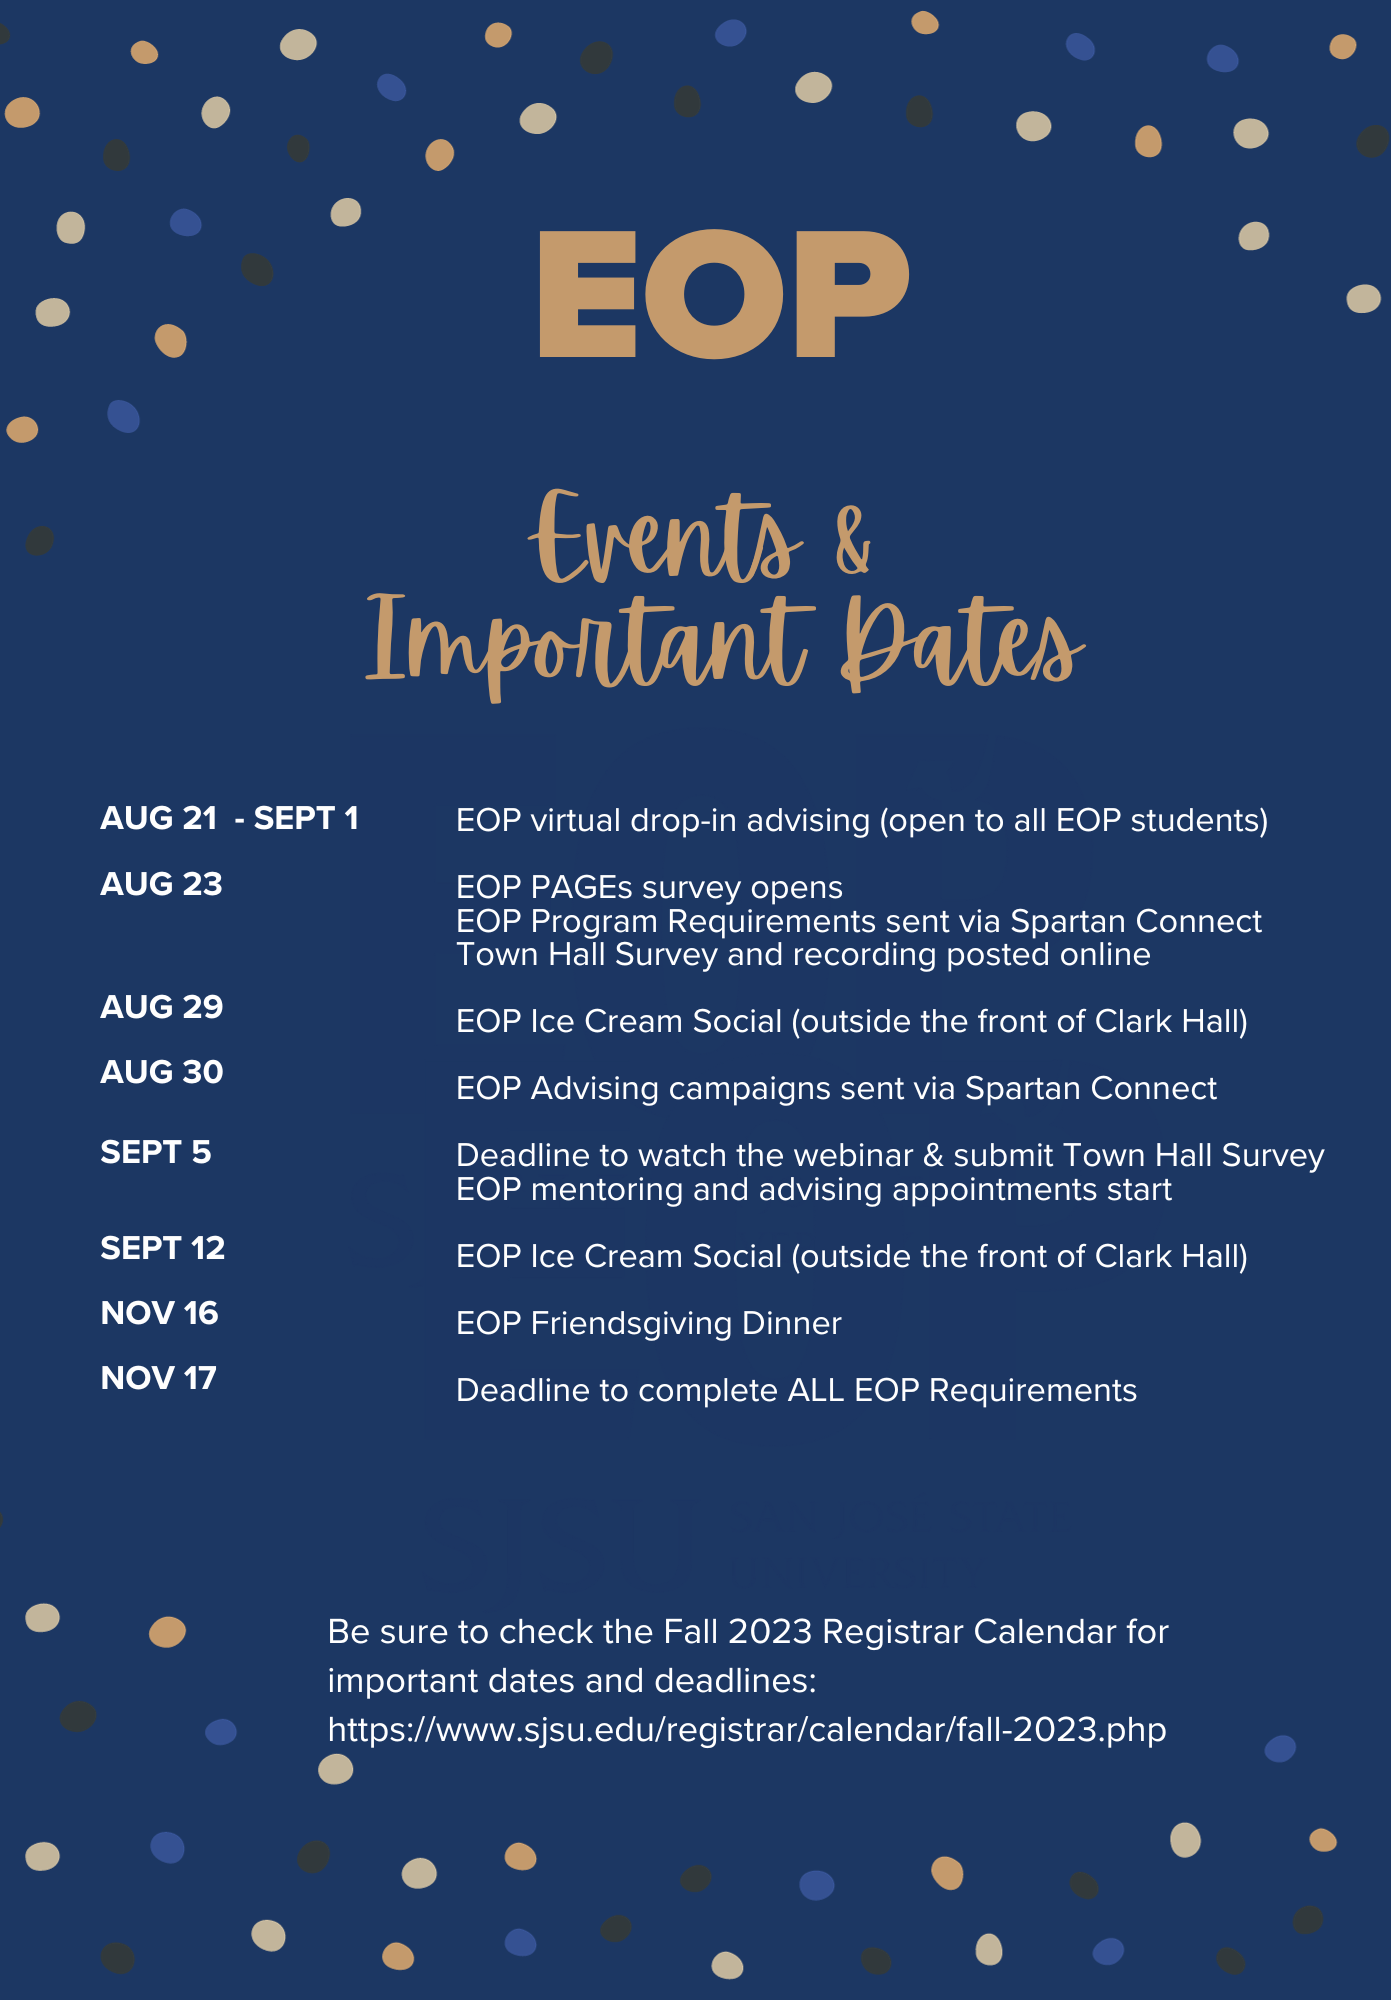 eop events